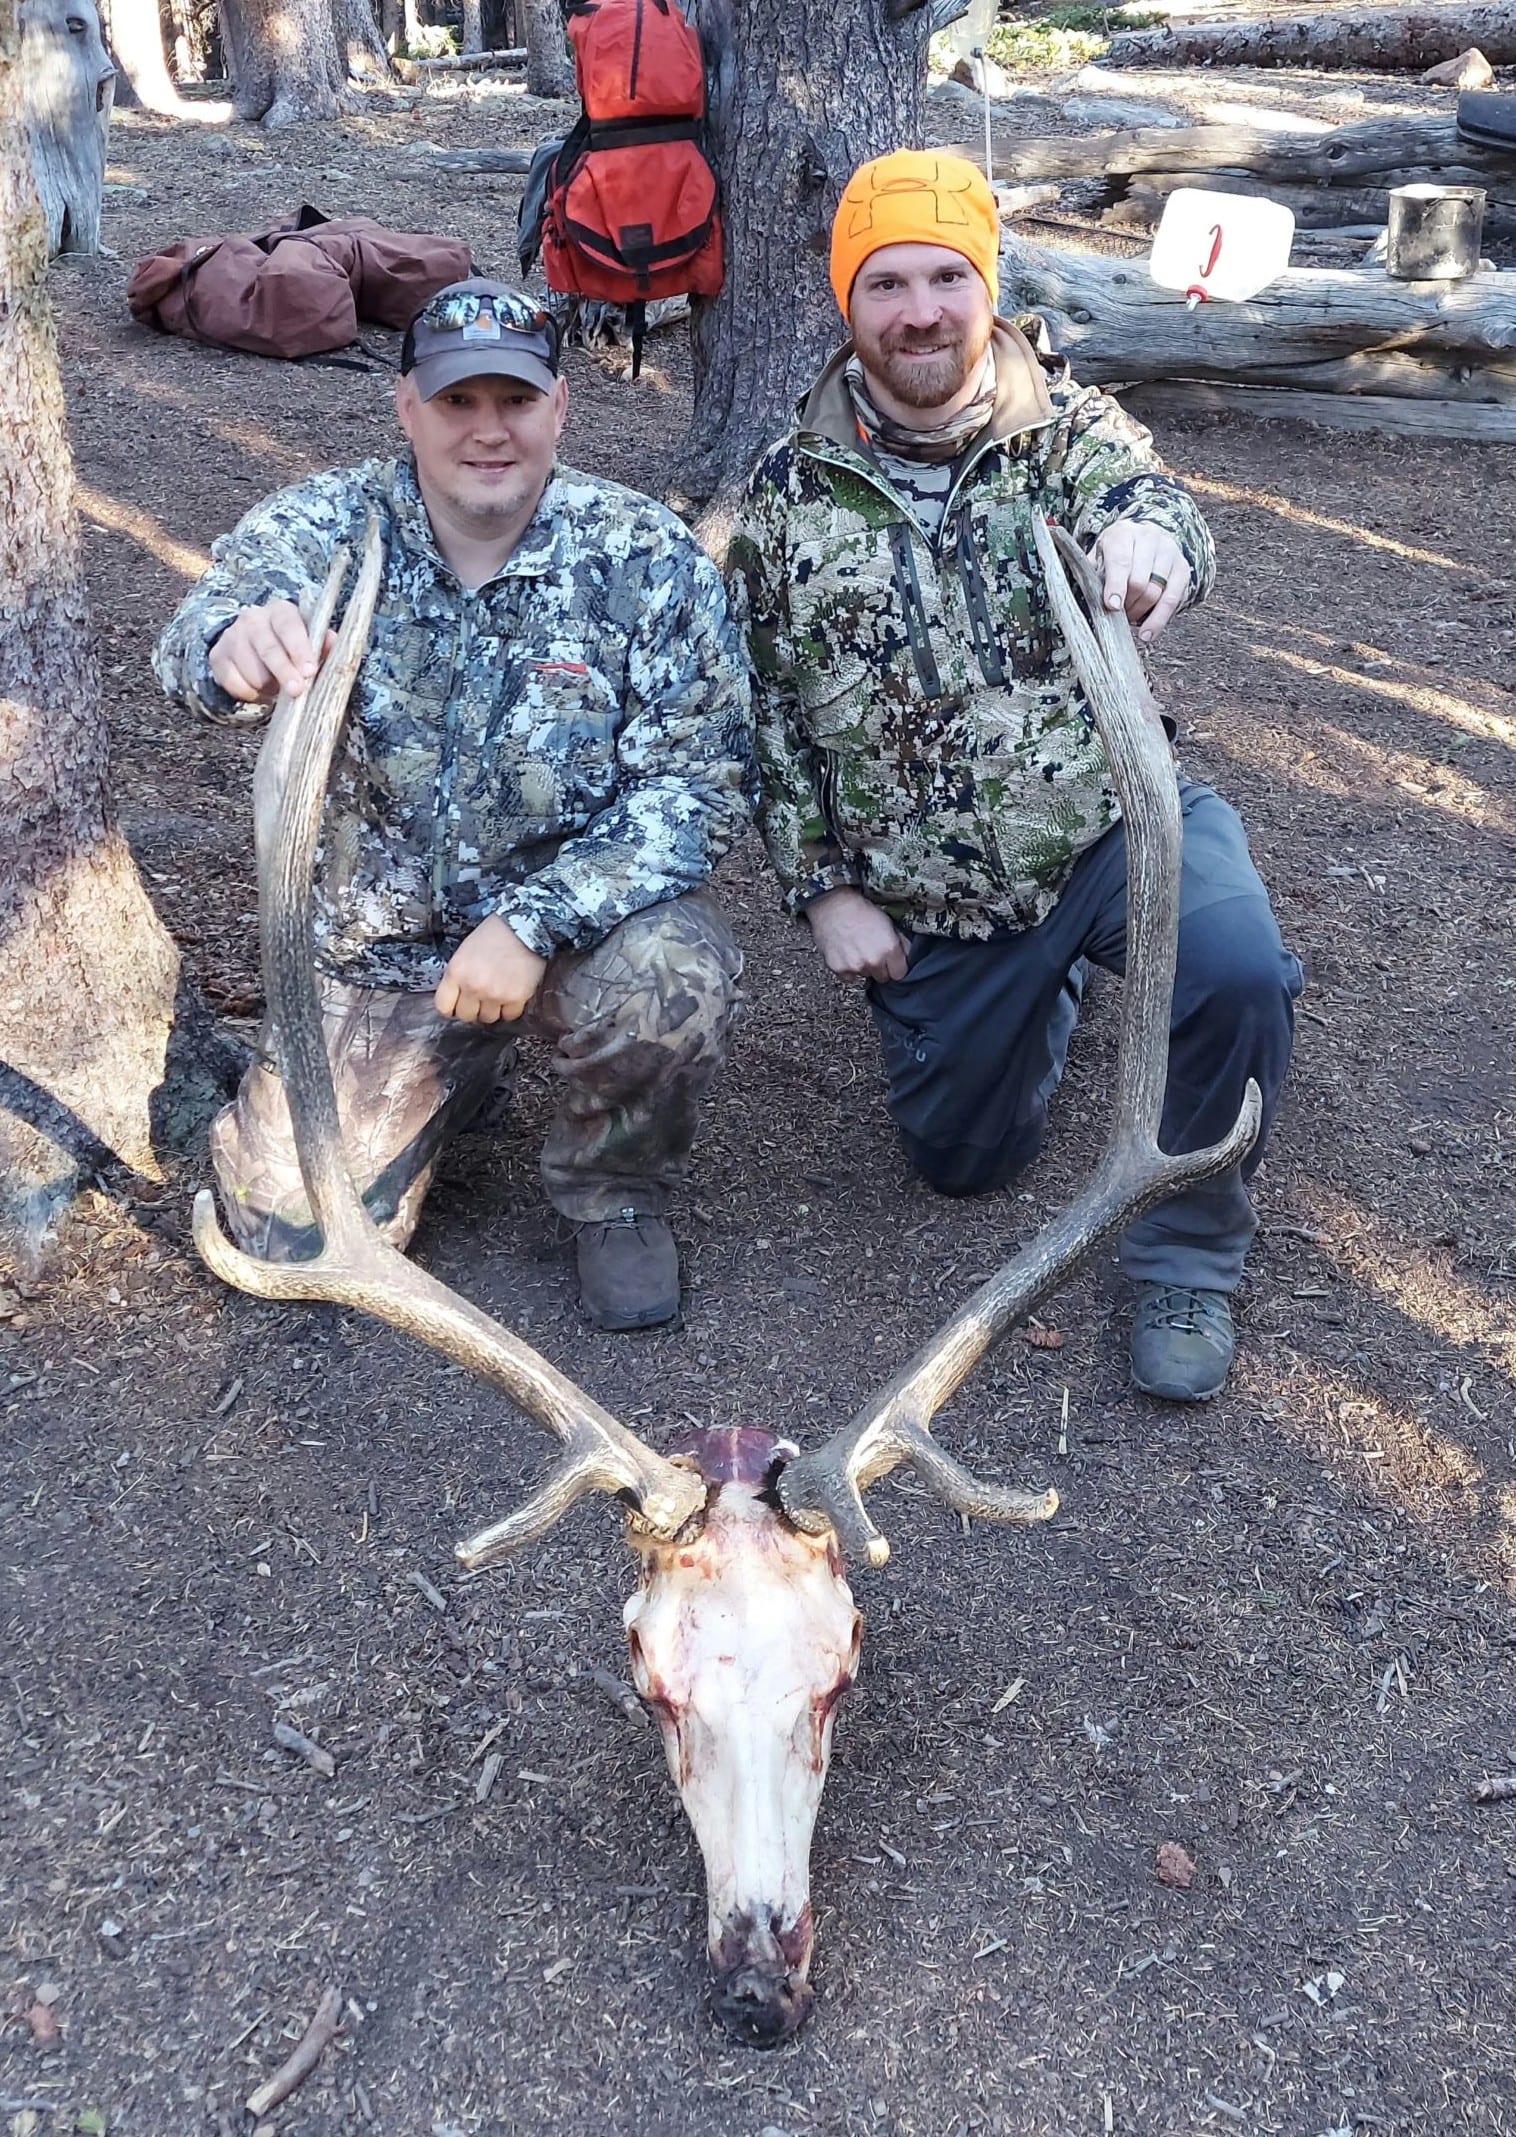 This outfitter will work very hard for their clients and will do everything they can within your physical abilities to make your hunt successful.